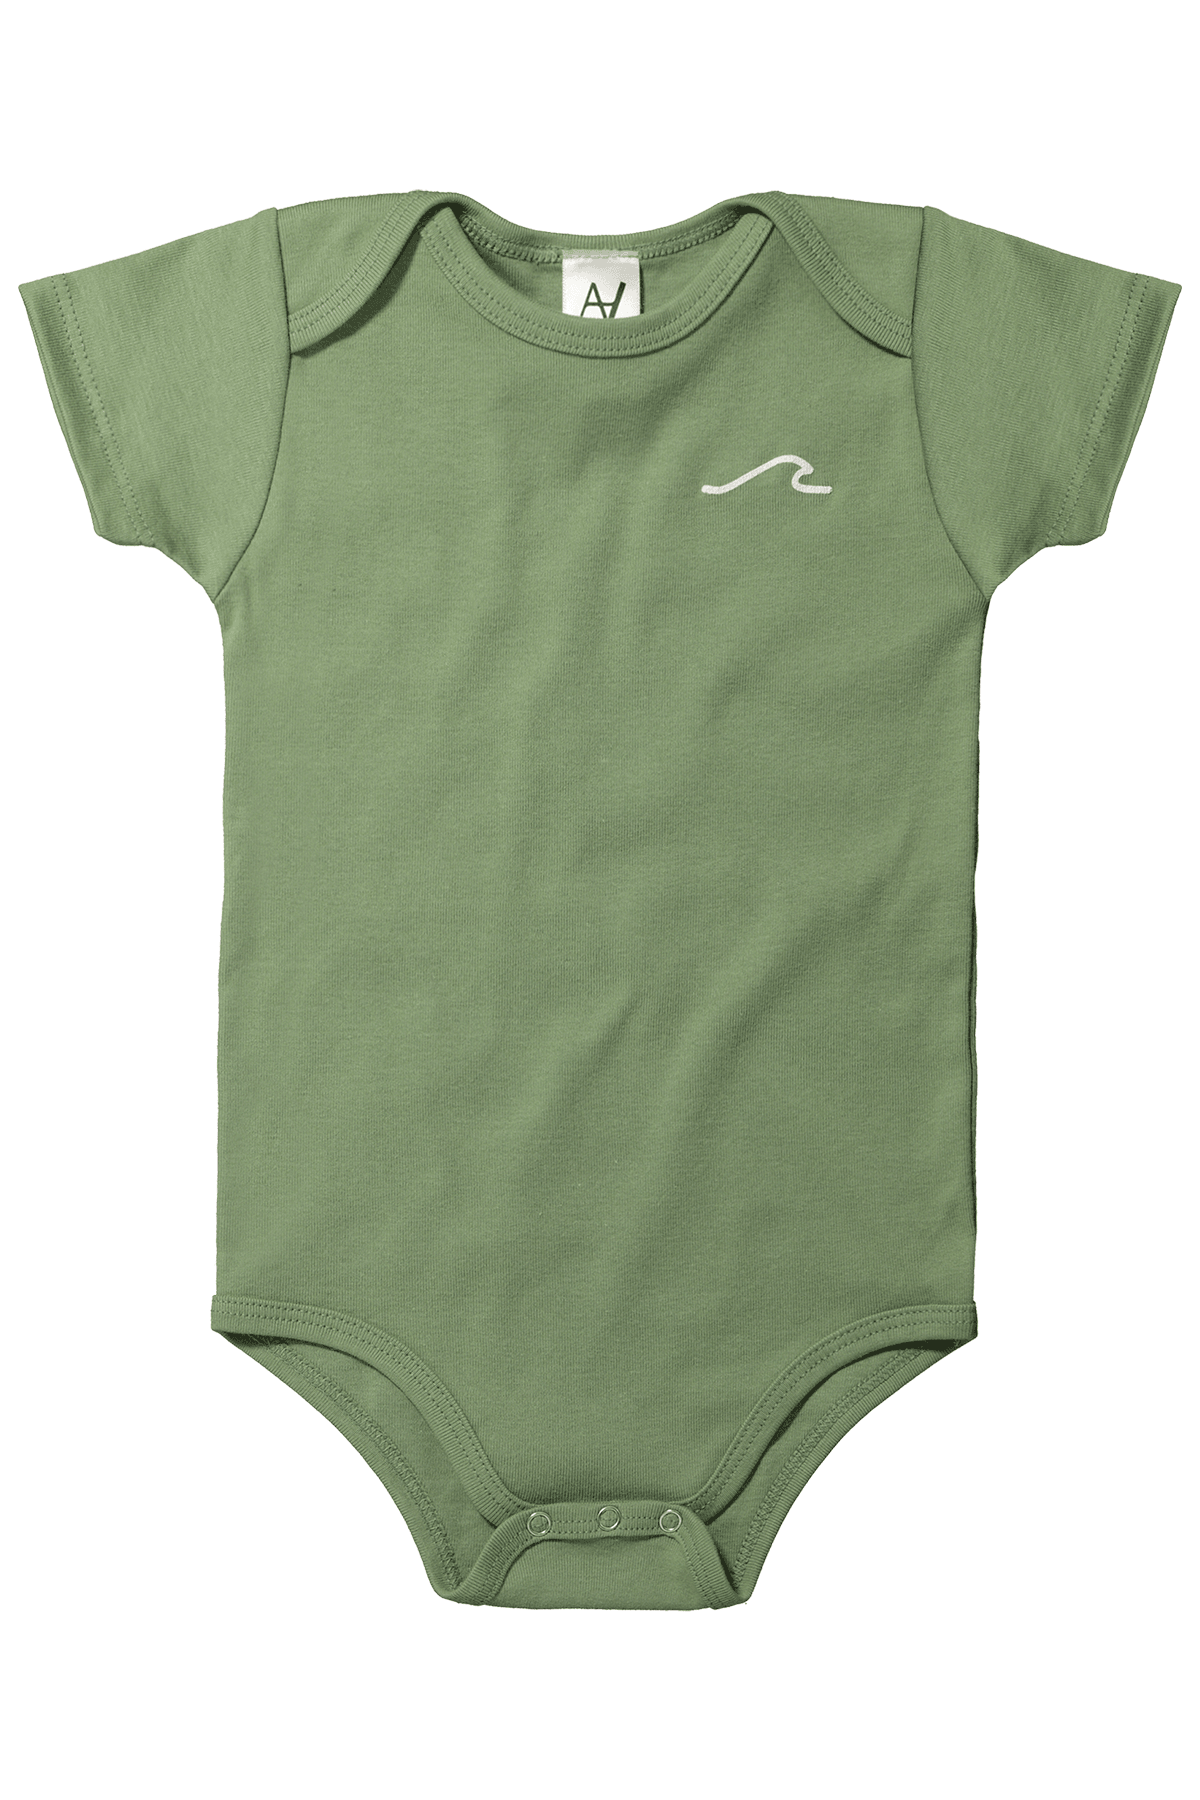 infant organic one piececategory_Baby from Awoke N Aware - SHOPELEOS